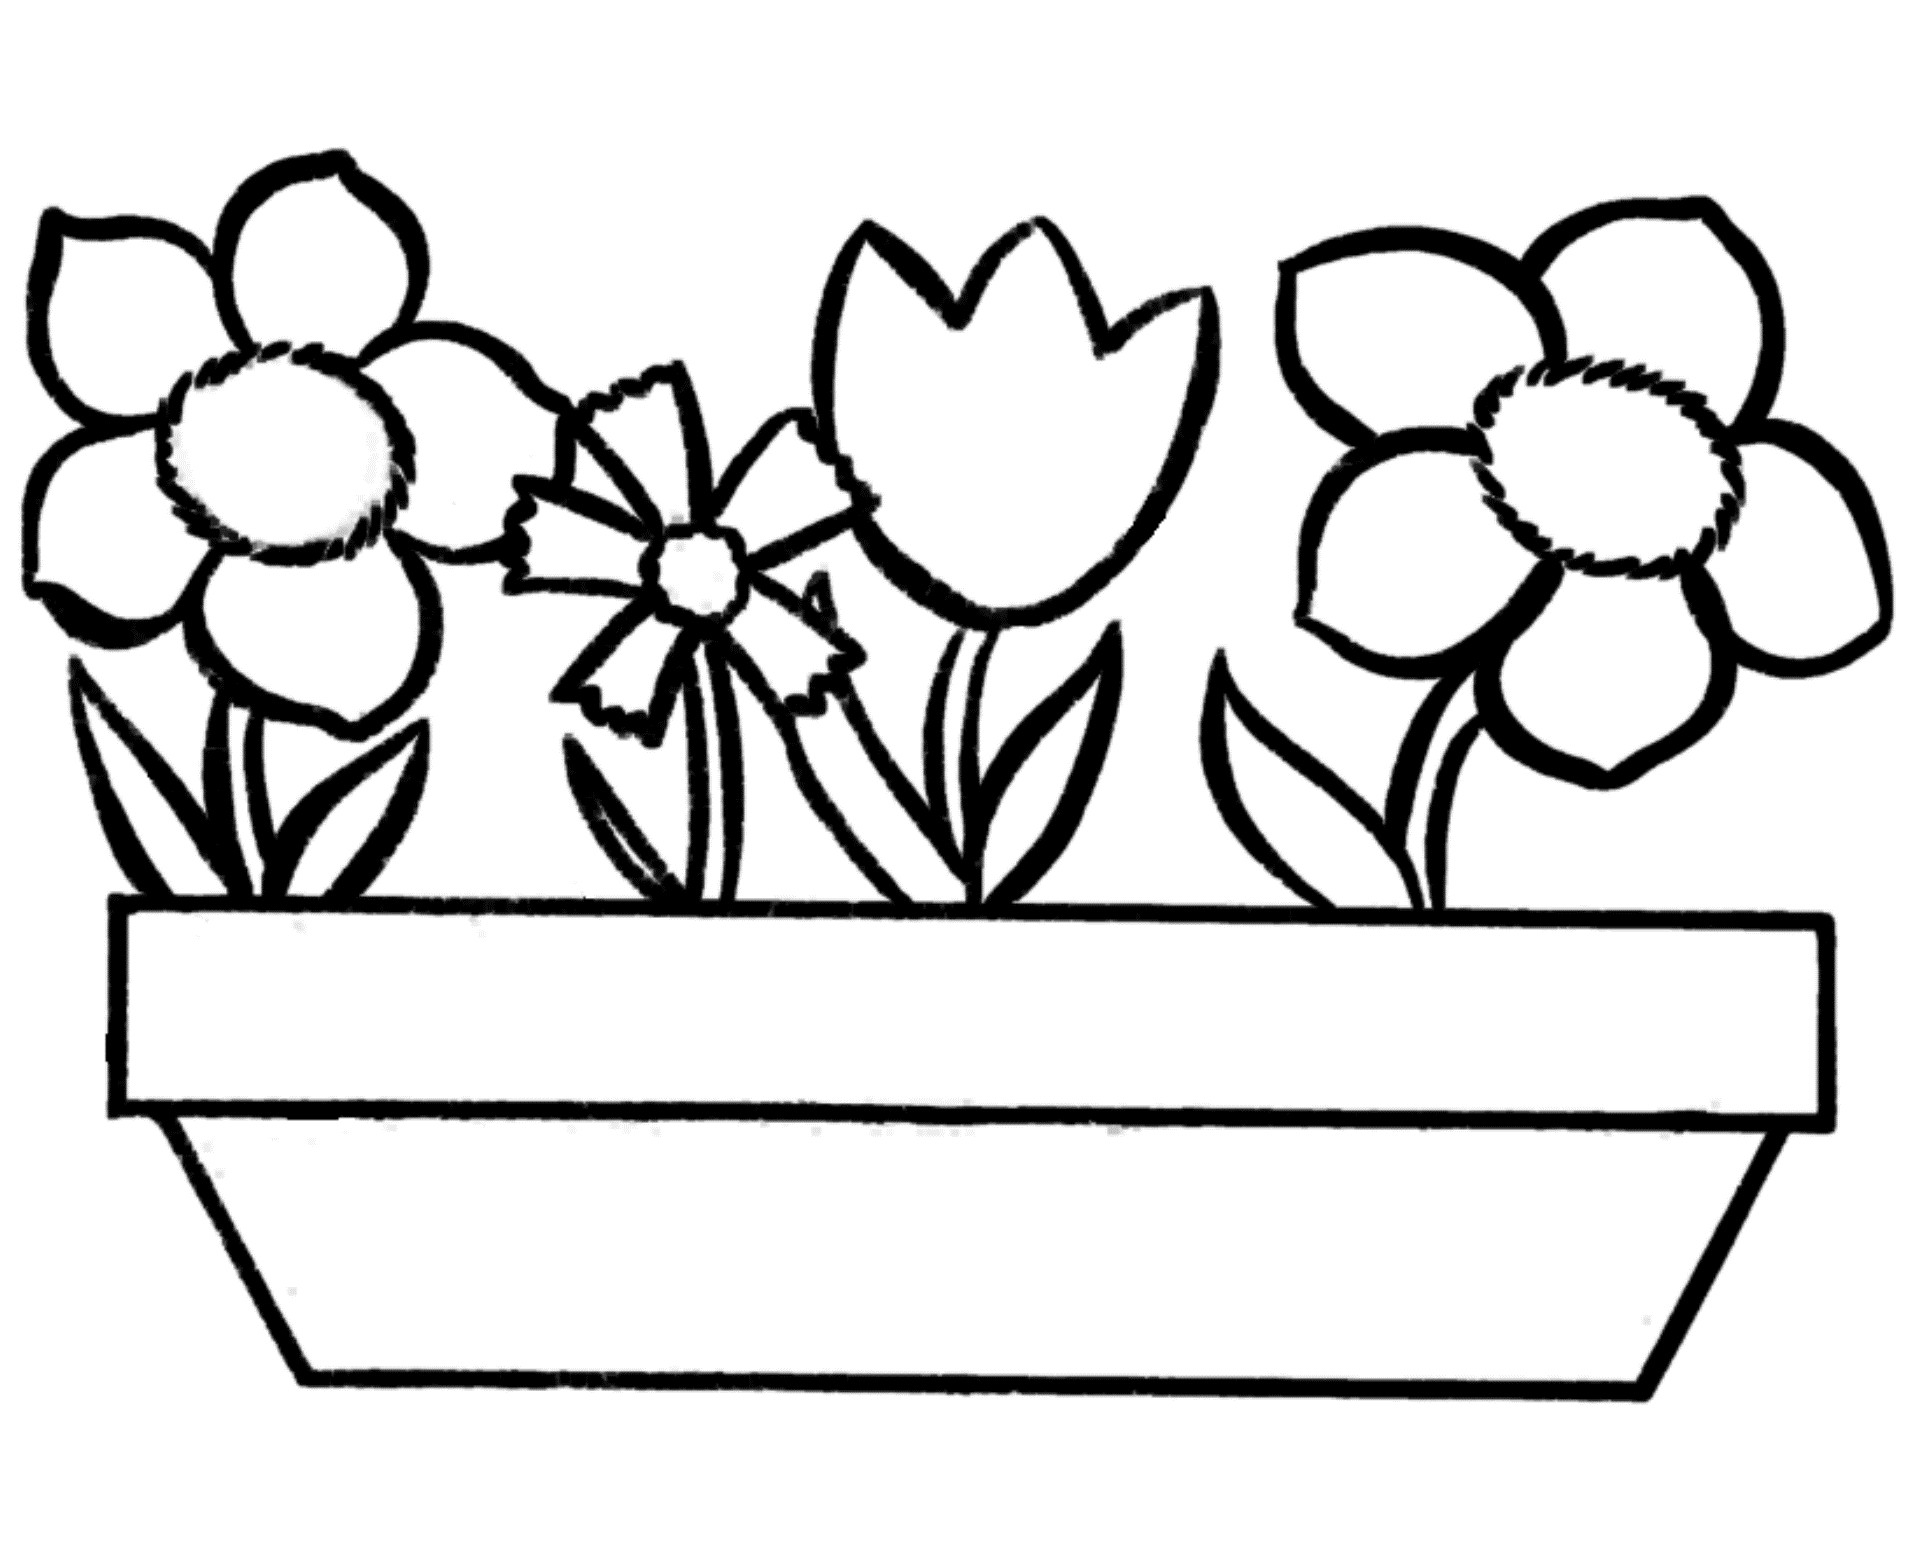 Artful Flower Coloring Sheets For Girls Flowers
 Printable Flower Coloring Pages For Preschool Printable